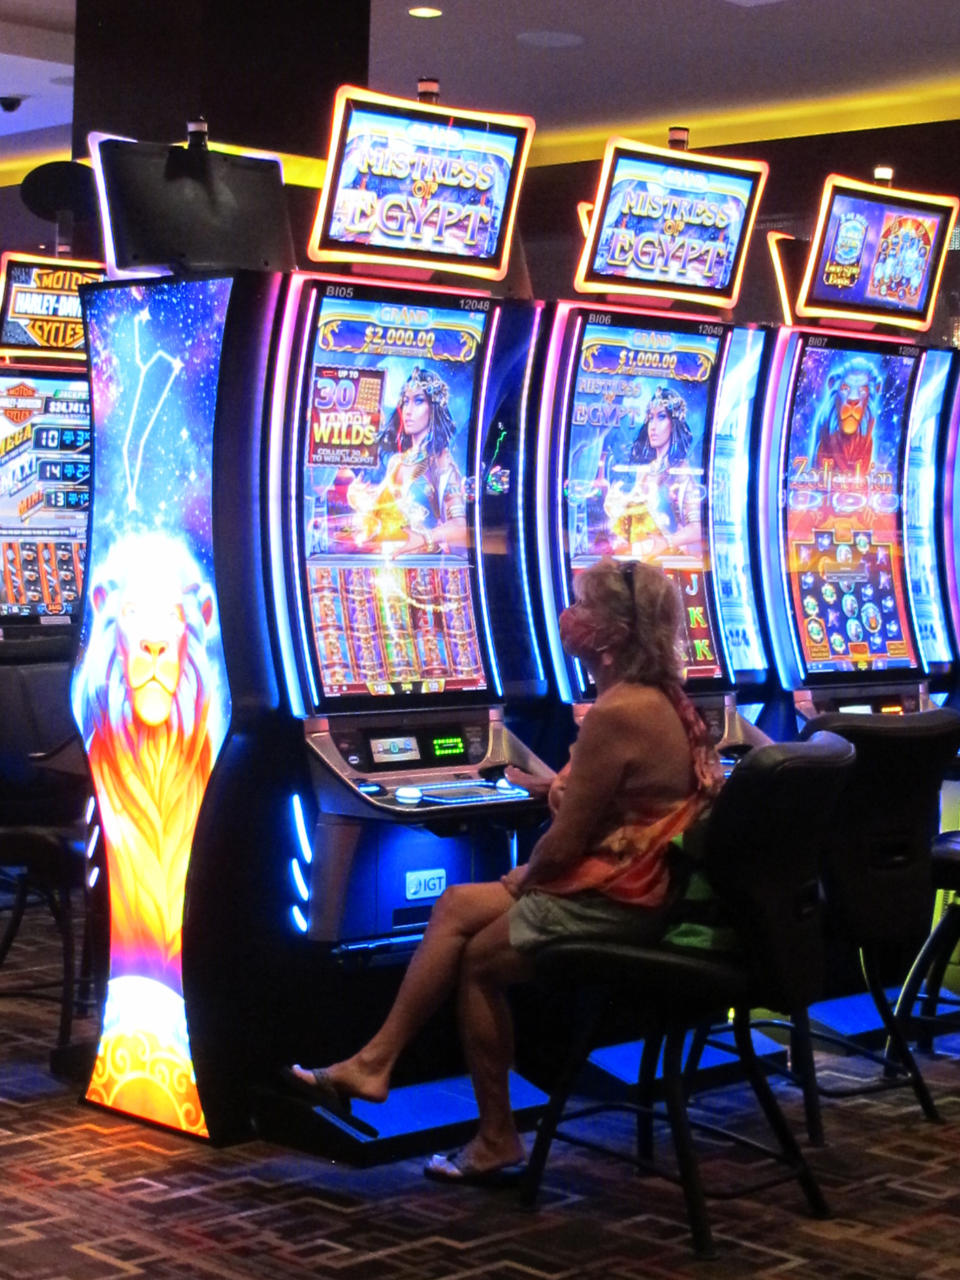 In this July 2, 2020 photo, a woman plays a slot machine at the Golden Nugget casino in Atlantic City N.J. Gambling companies in the U.S. are increasingly bringing different forms of gambling together, including sports betting, casino gambling, internet gambling and daily fantasy sports, and partnering with media companies as they seek to increase revenue. (AP Photo/Wayne Parry)